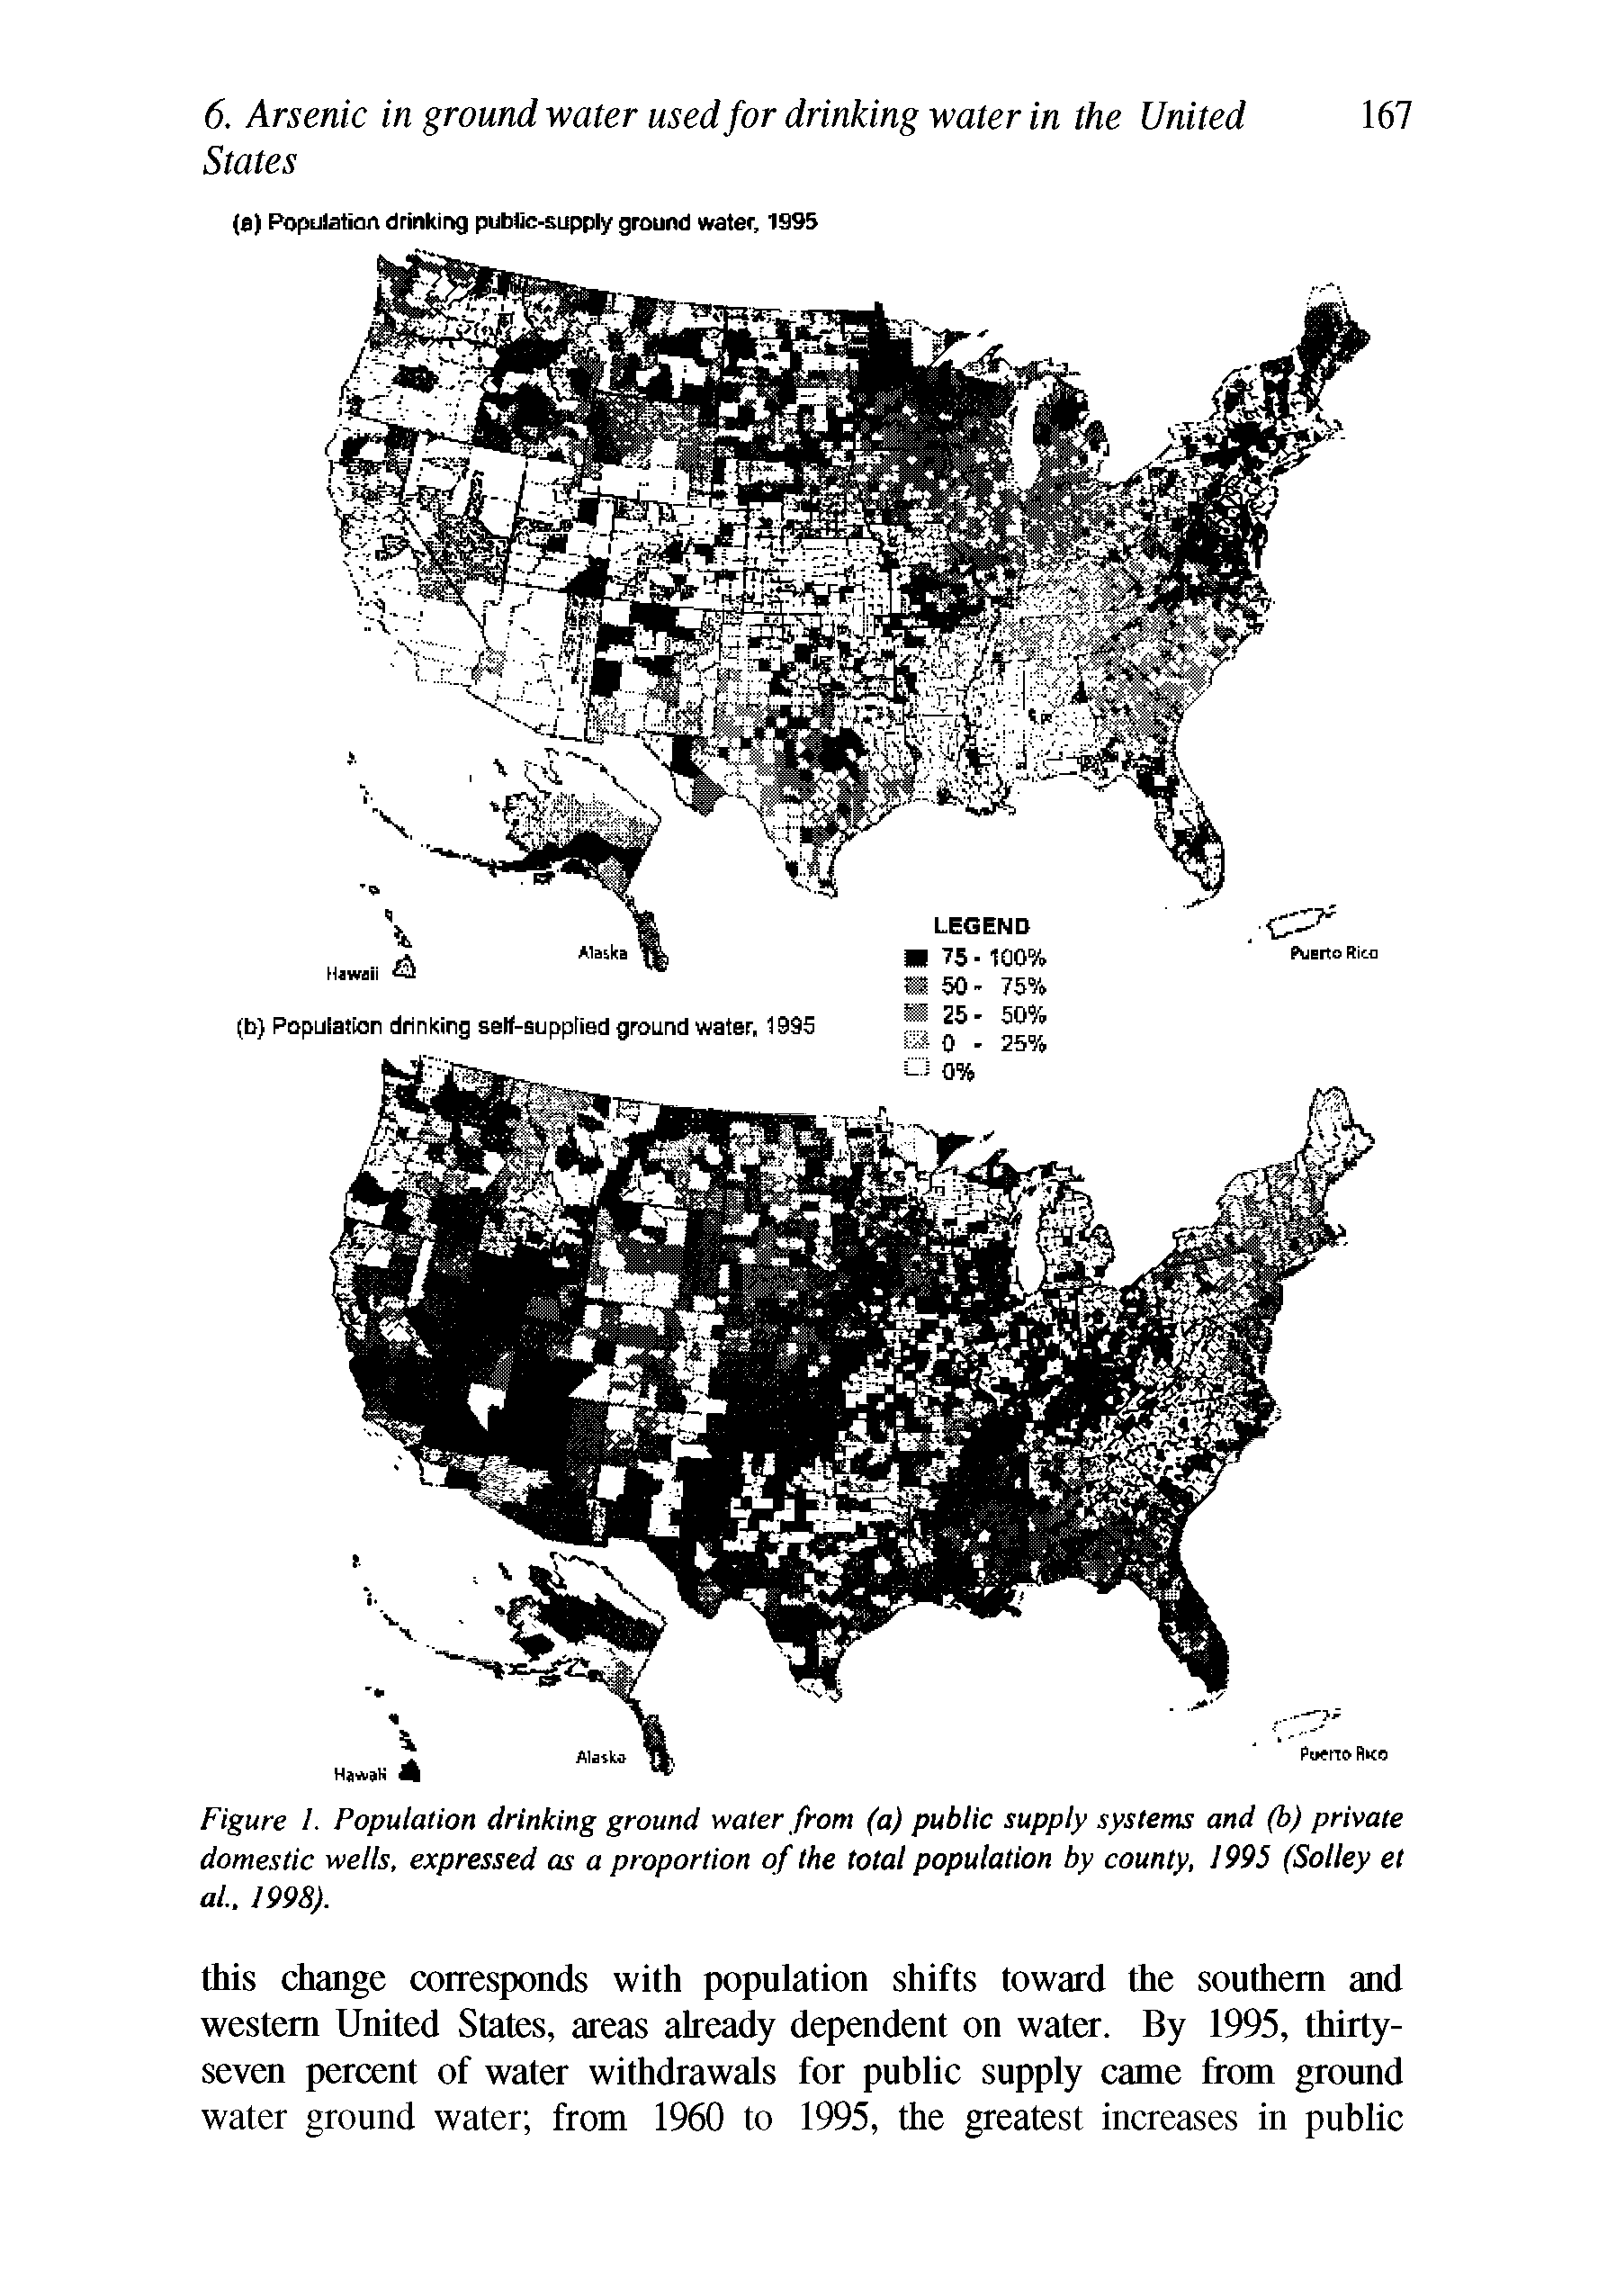 Figure /. Population drinking ground water front (a) public supply systems and (b) private domestic wells, expressed as a proportion of the total population by county, 1995 (Solley et at, 1998).